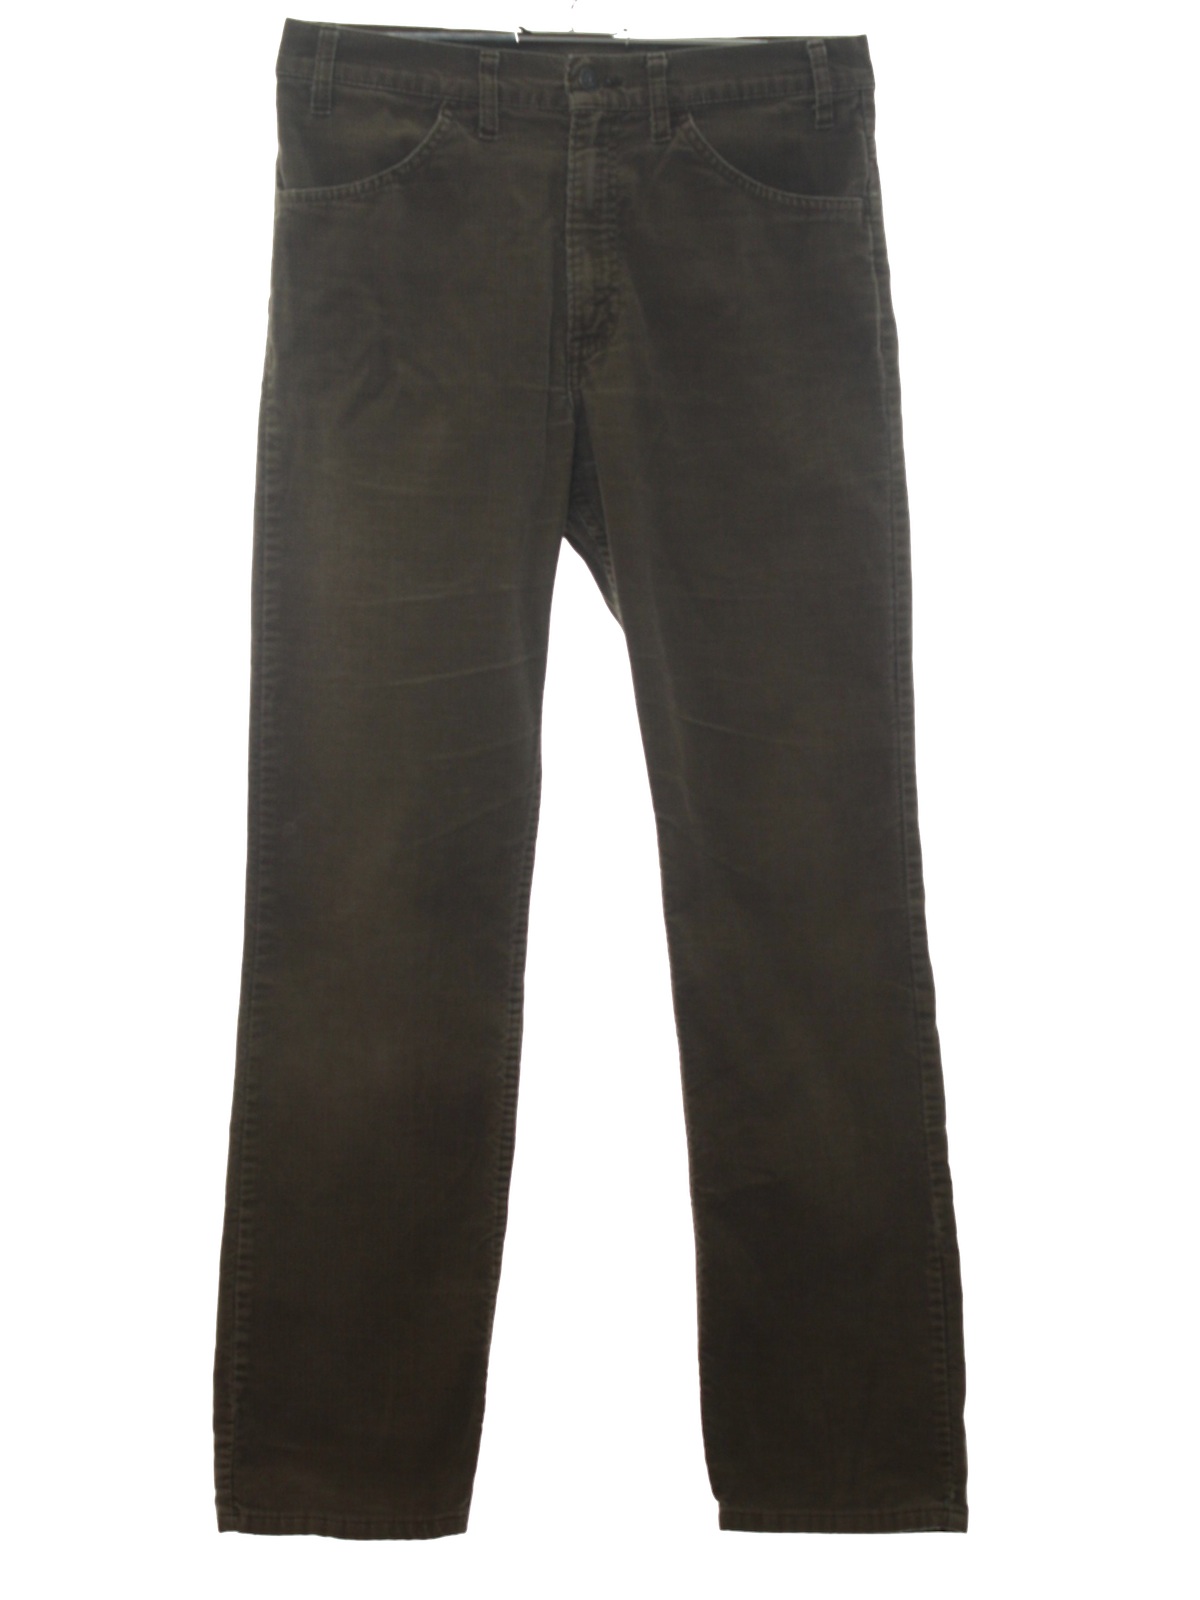 Retro 1980s Pants: 80s -Levis- Mens light brown cotton and polyester ...